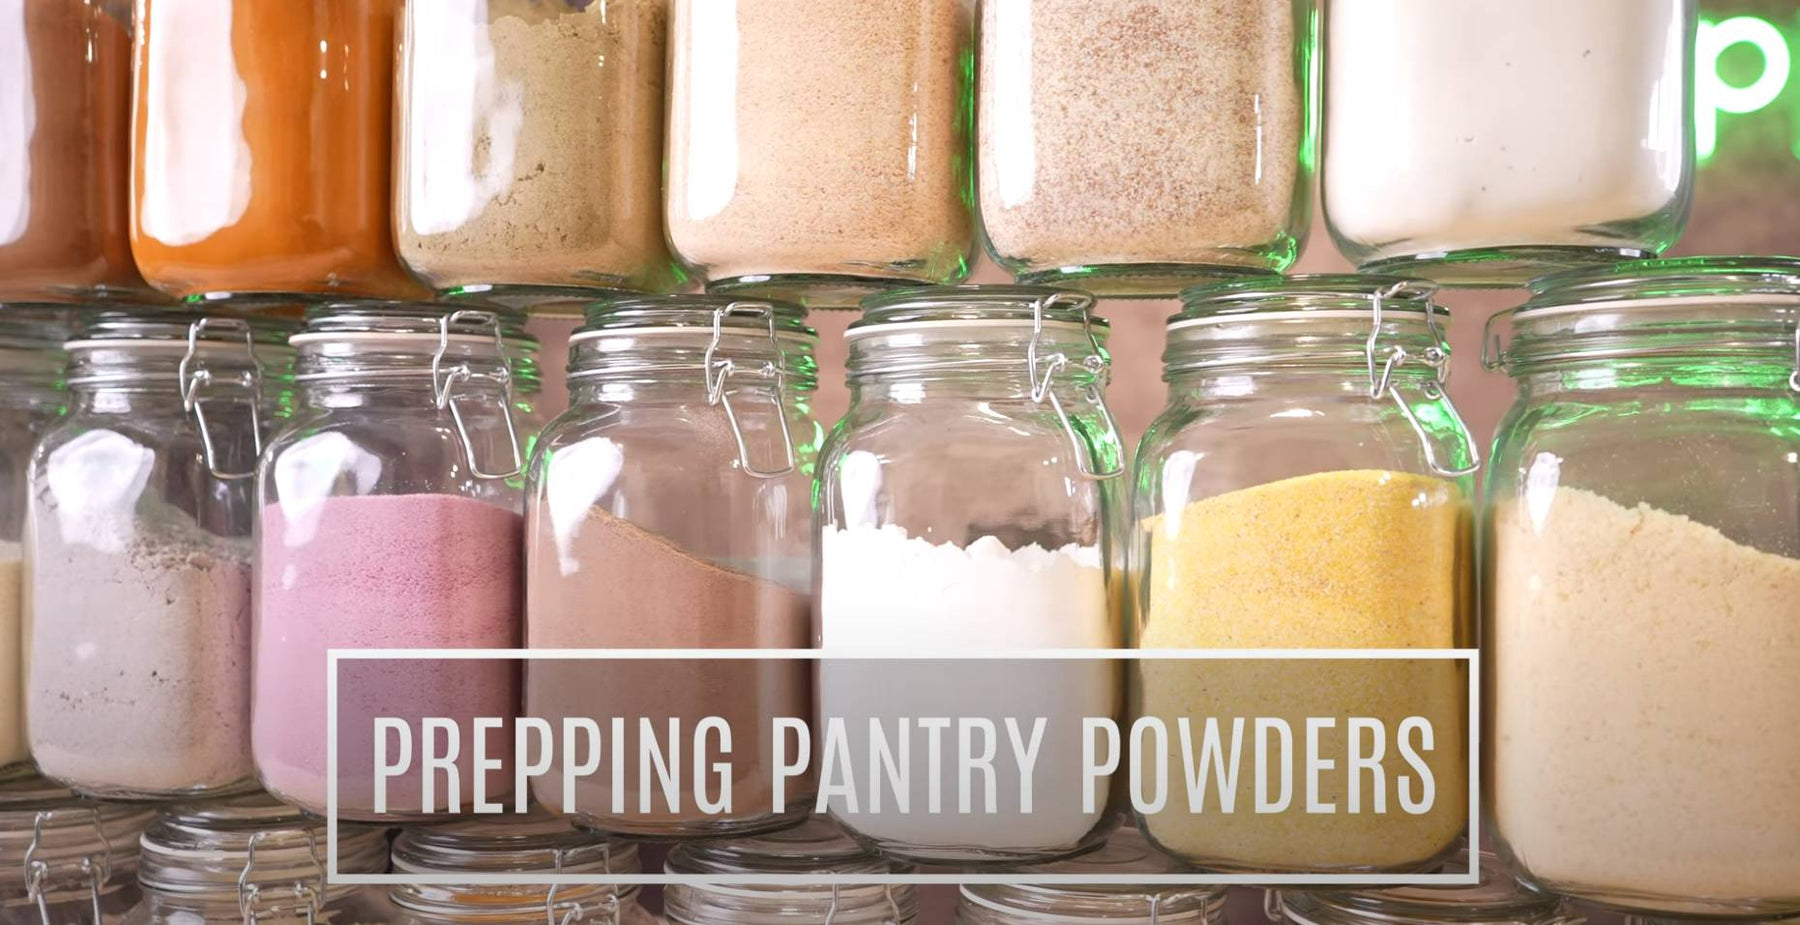 25 powdered foods to stockpile now!